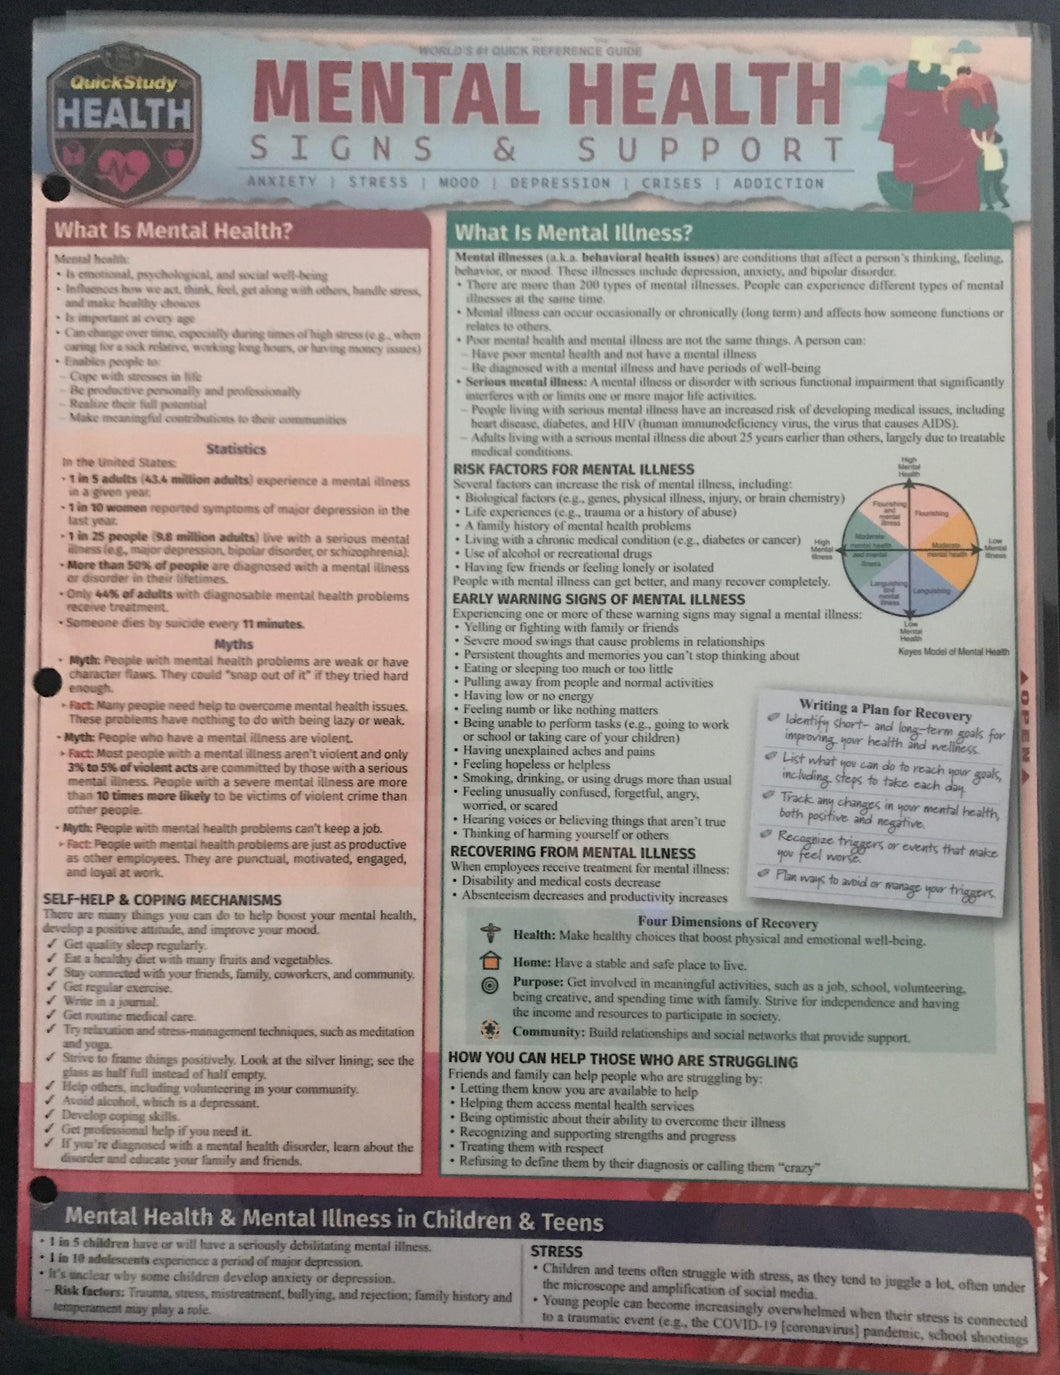 Mental Health Laminated Reference Guide (8.5 x 11)